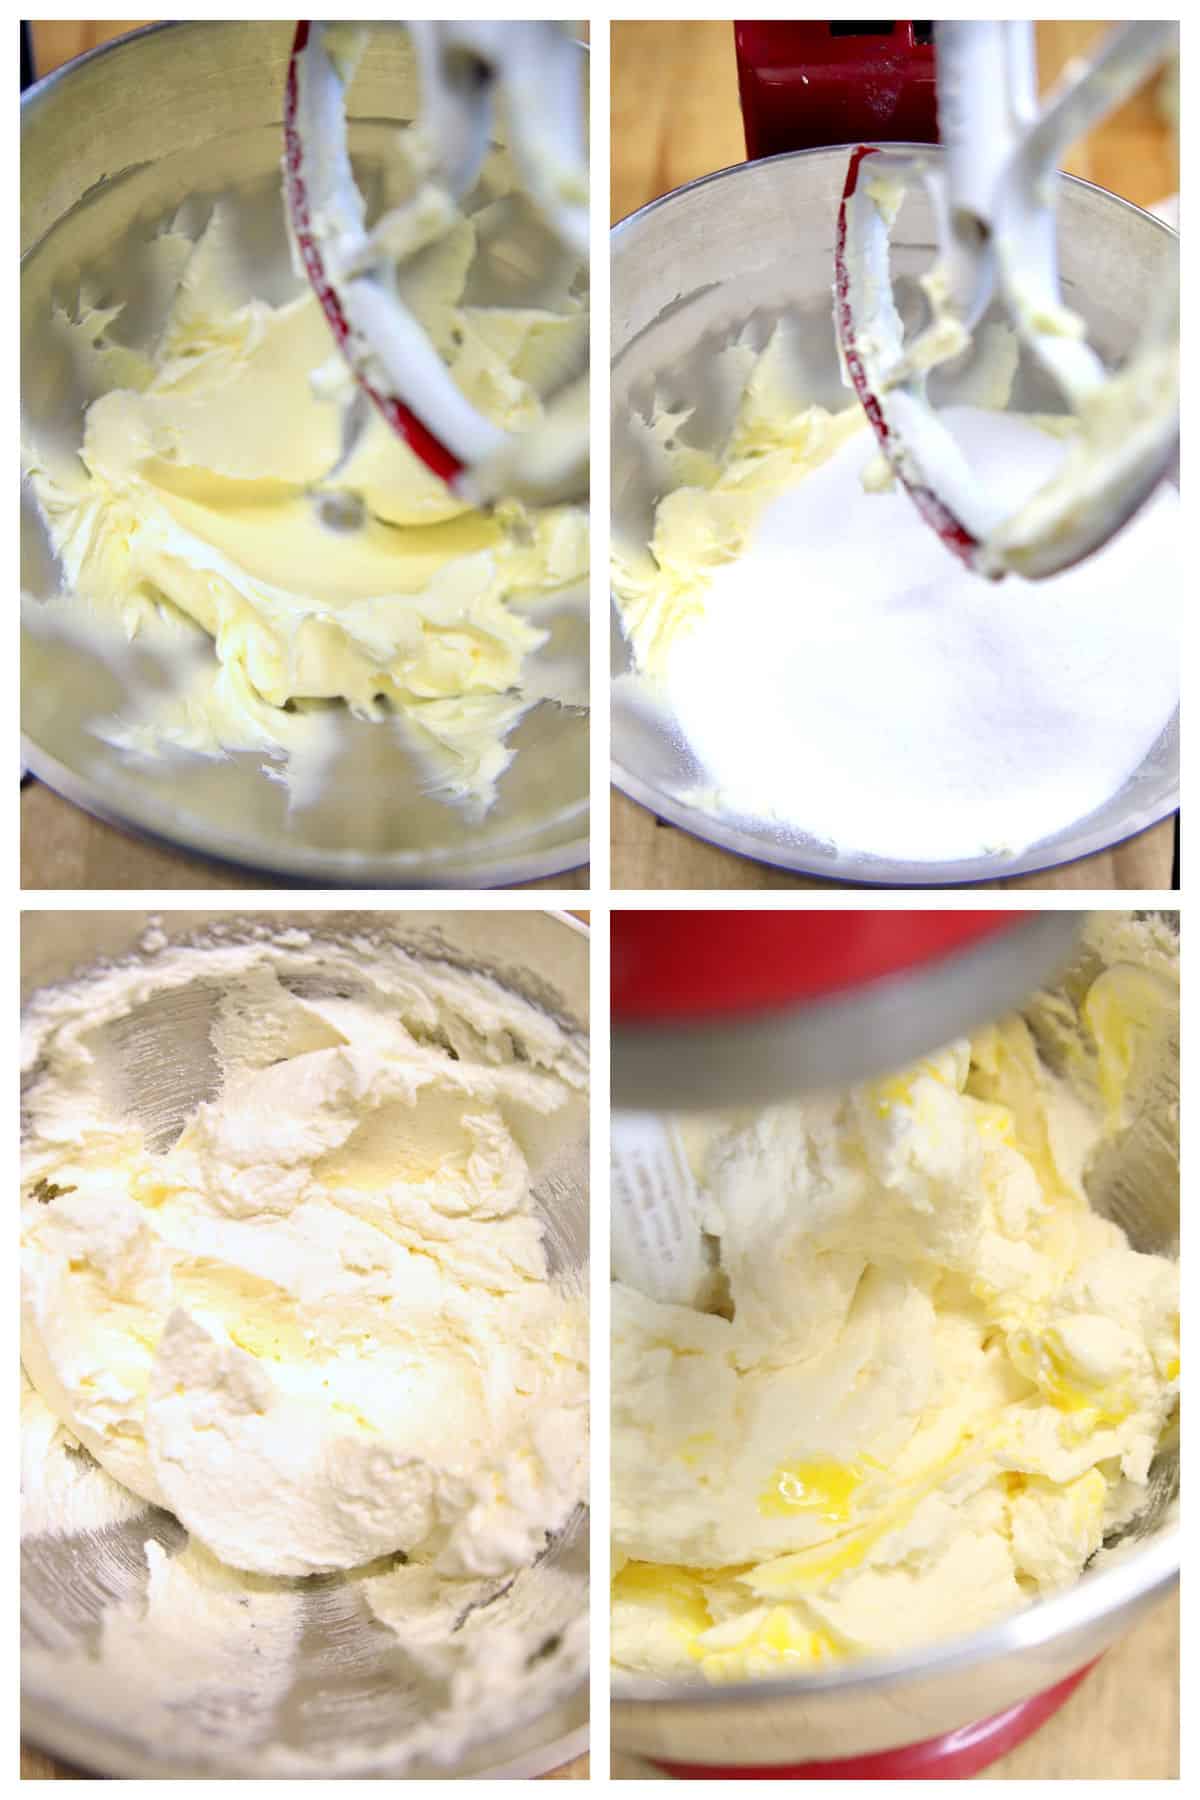 Collage making batter for pound cake with mixer.